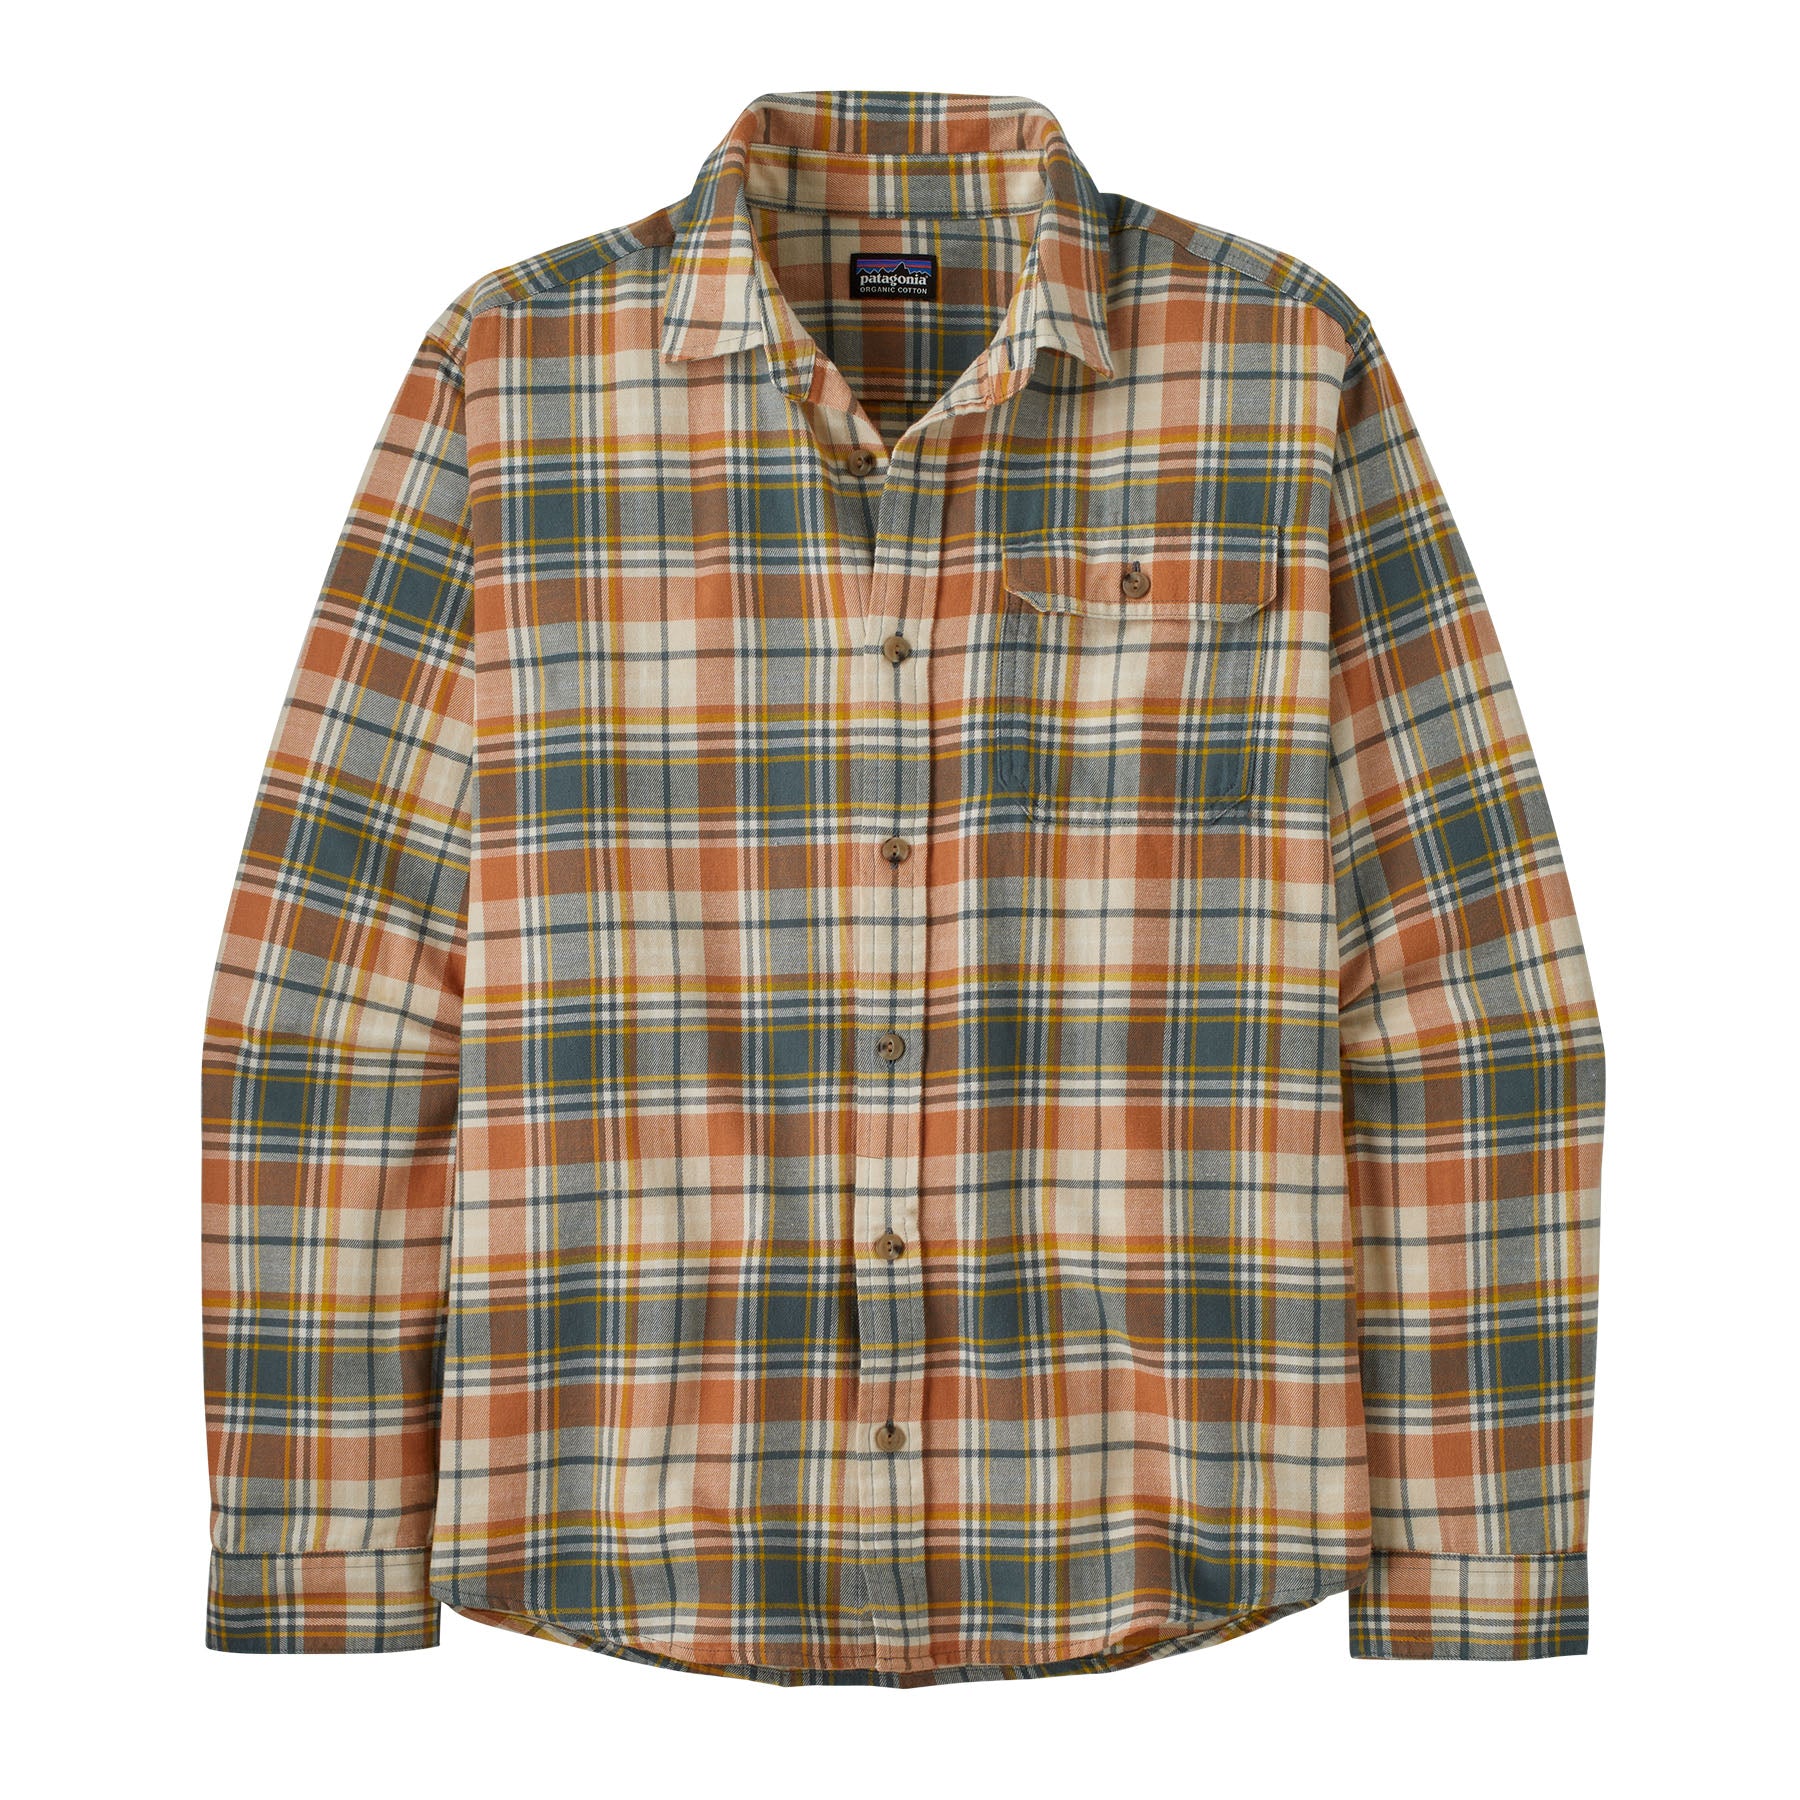 Men's Long-Sleeved Cotton in Conversion Lightweight Fjord Flannel Shir